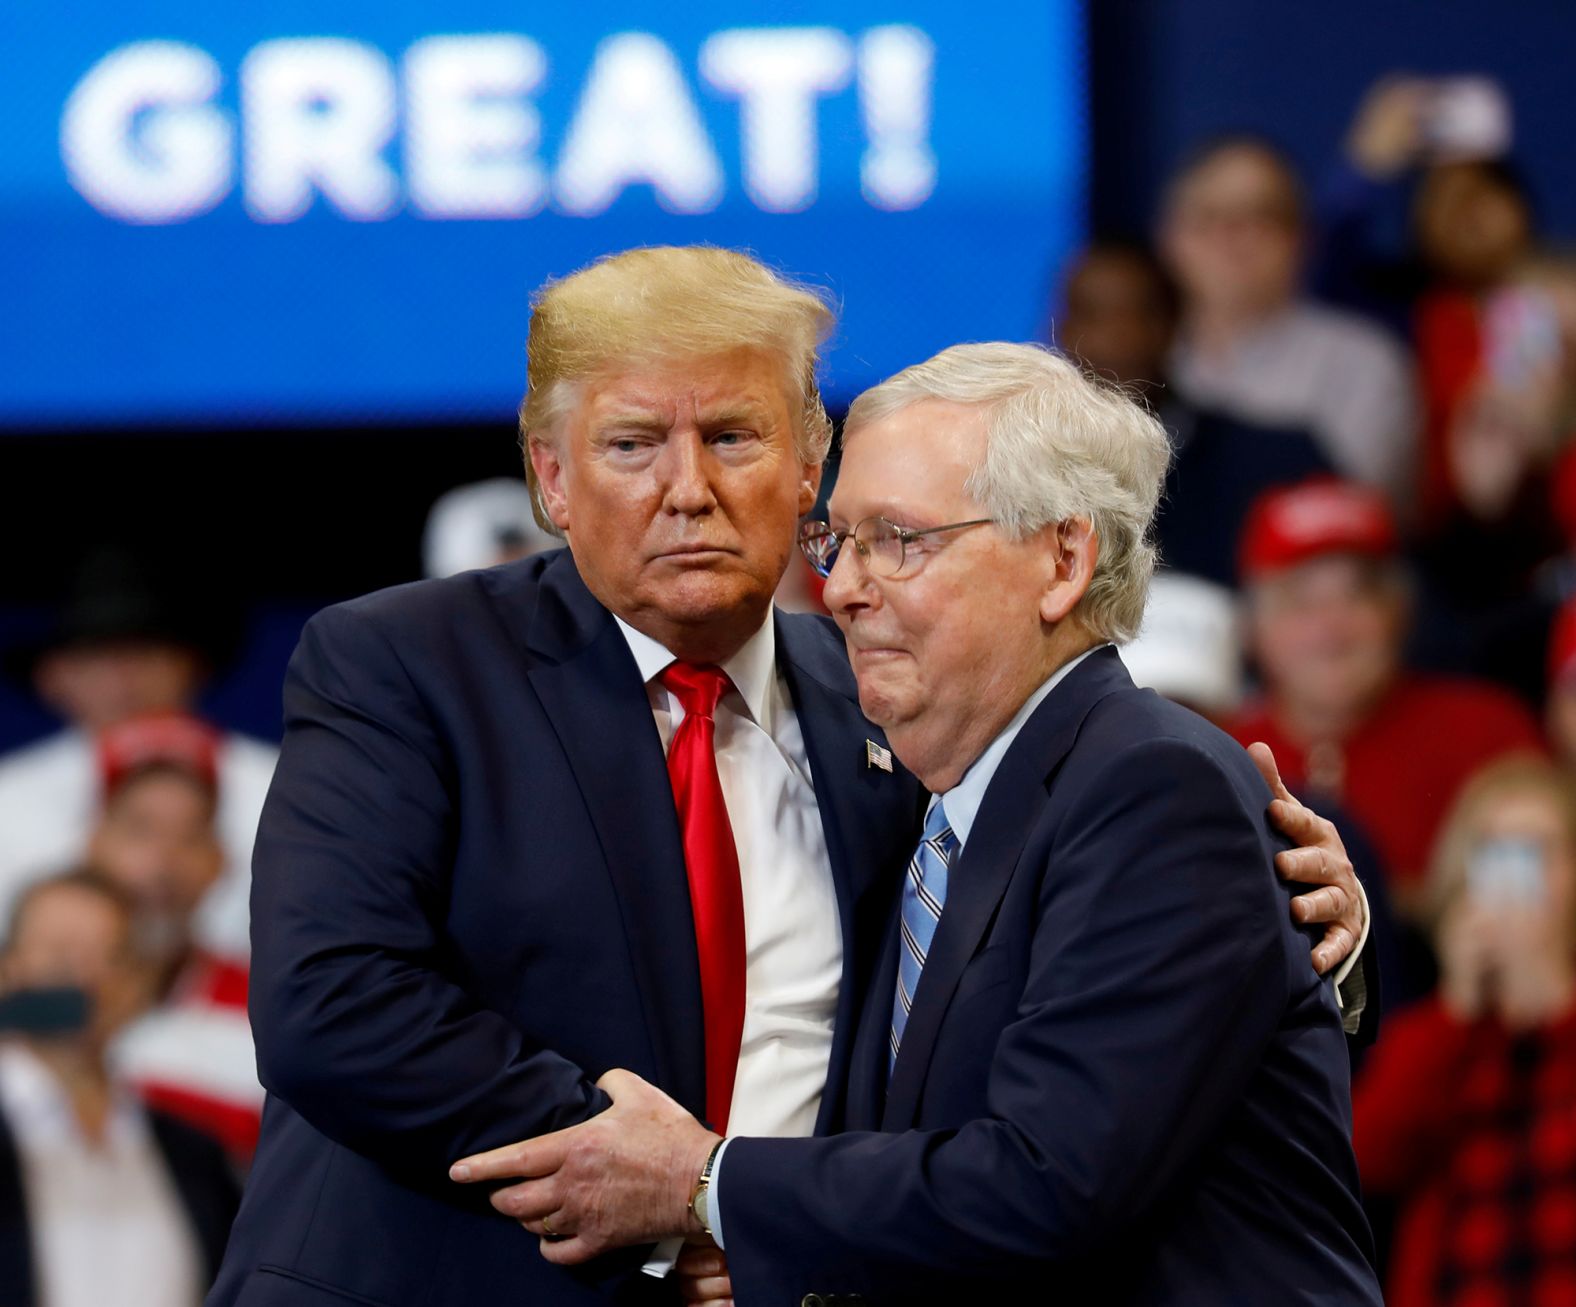 McConnell and Trump shake hands at a campaign rally in Lexington, Kentucky, in November 2019.